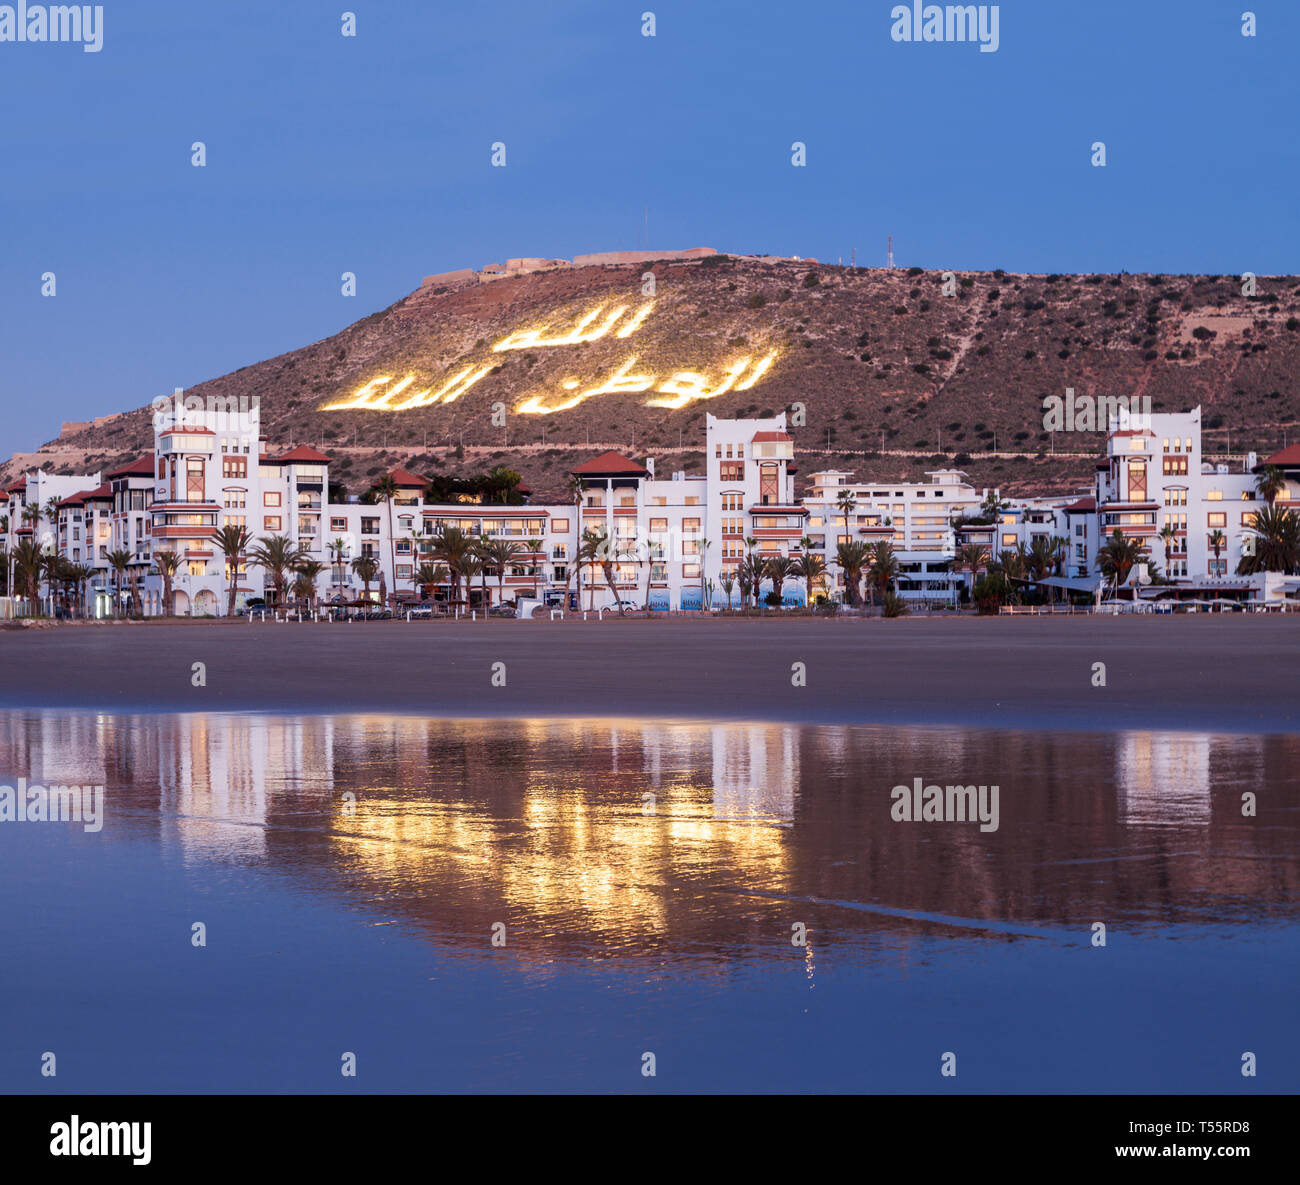 Skyline of Agadir at sunset in Morocco Stock Photo